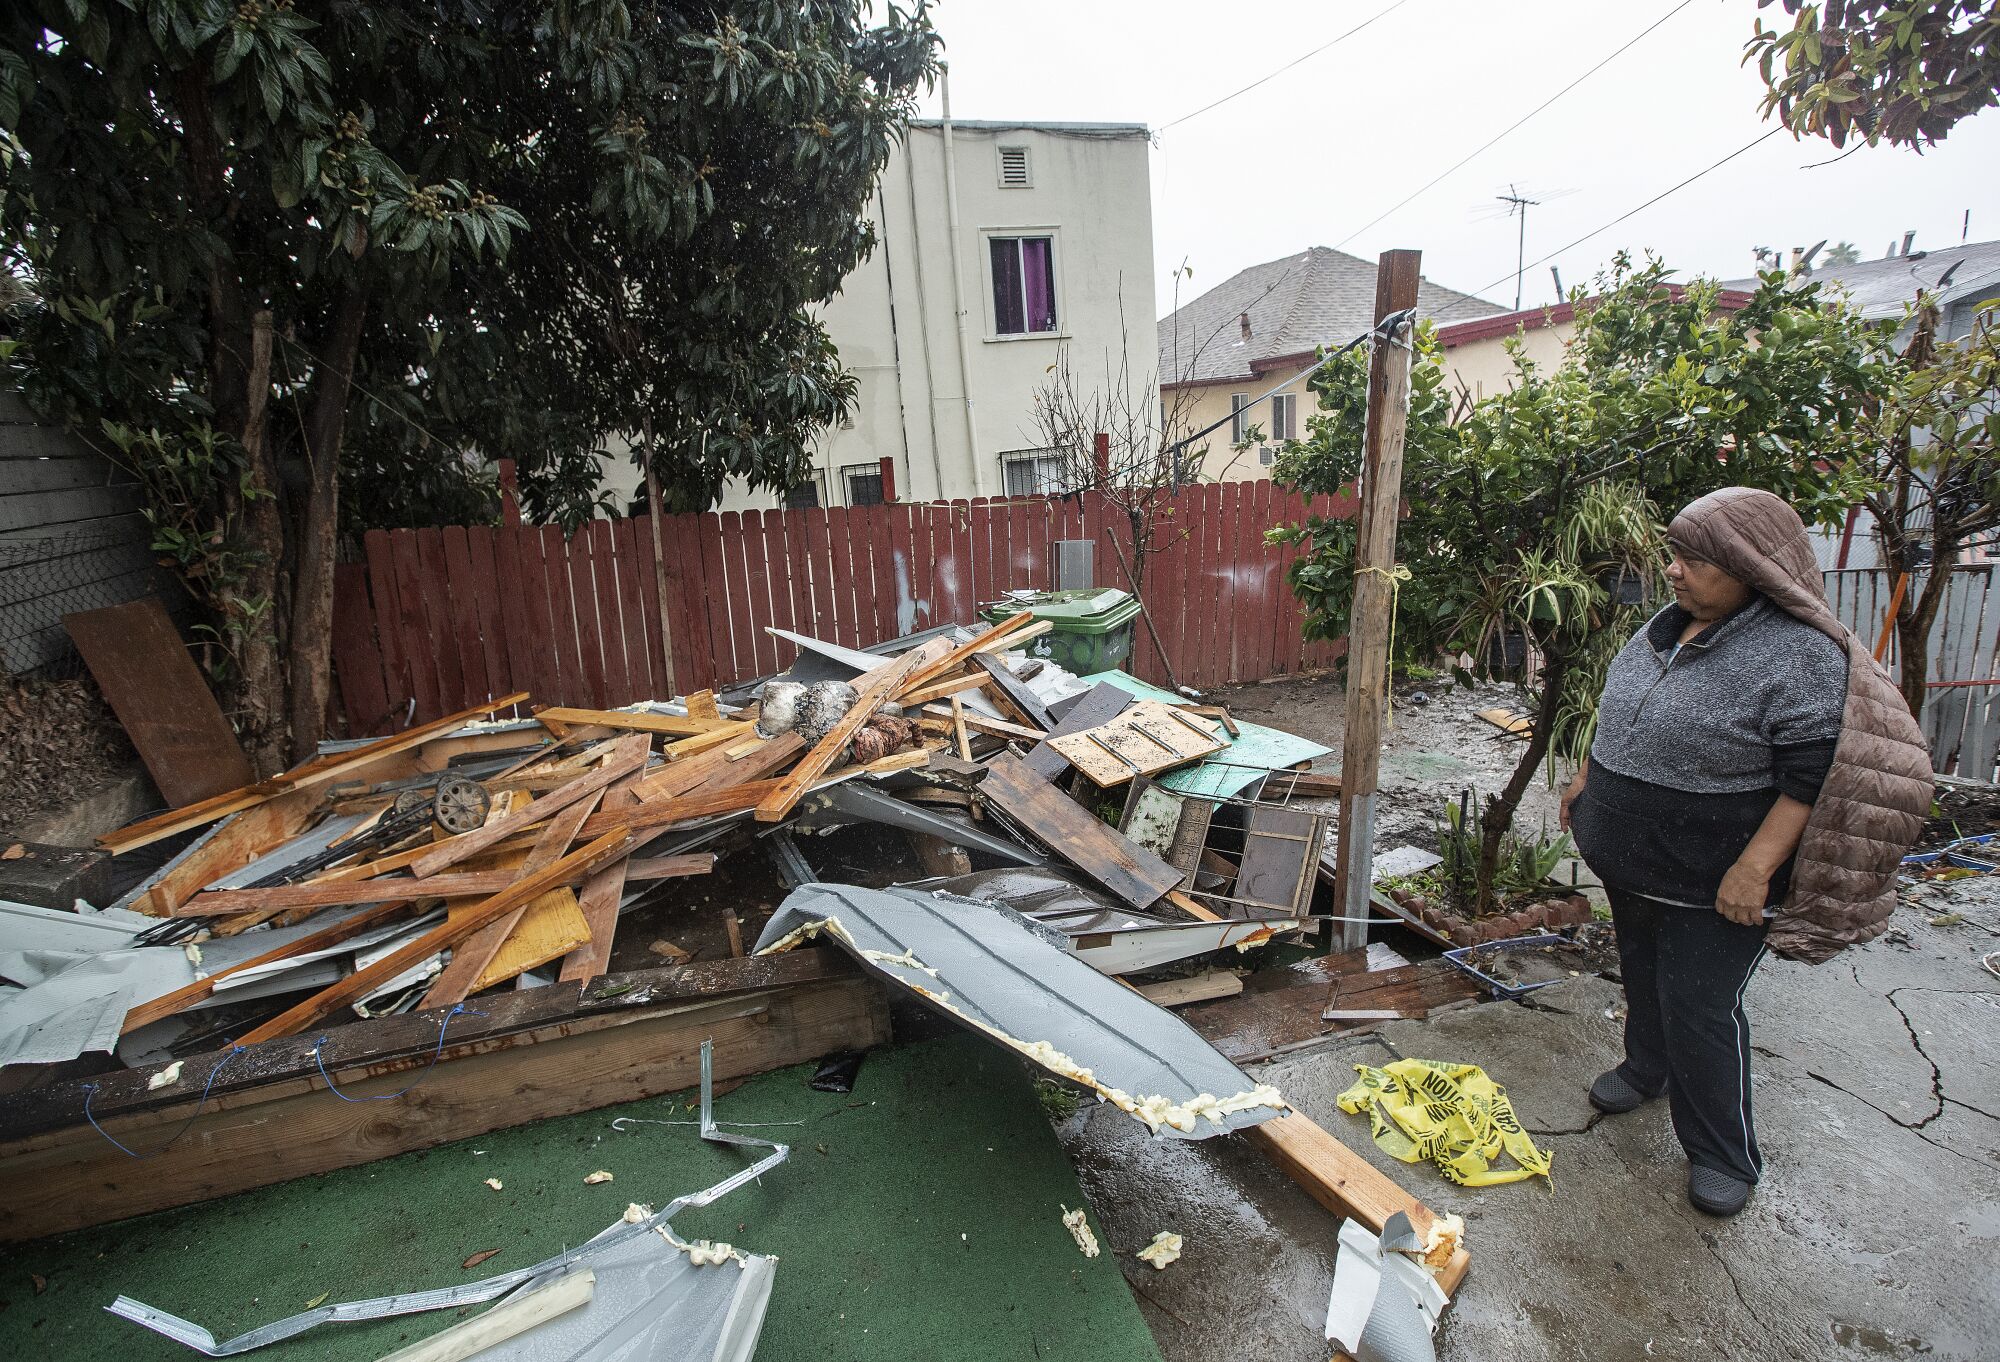 A woman looks at the shredded remains of her storage shed outside of her apartment.